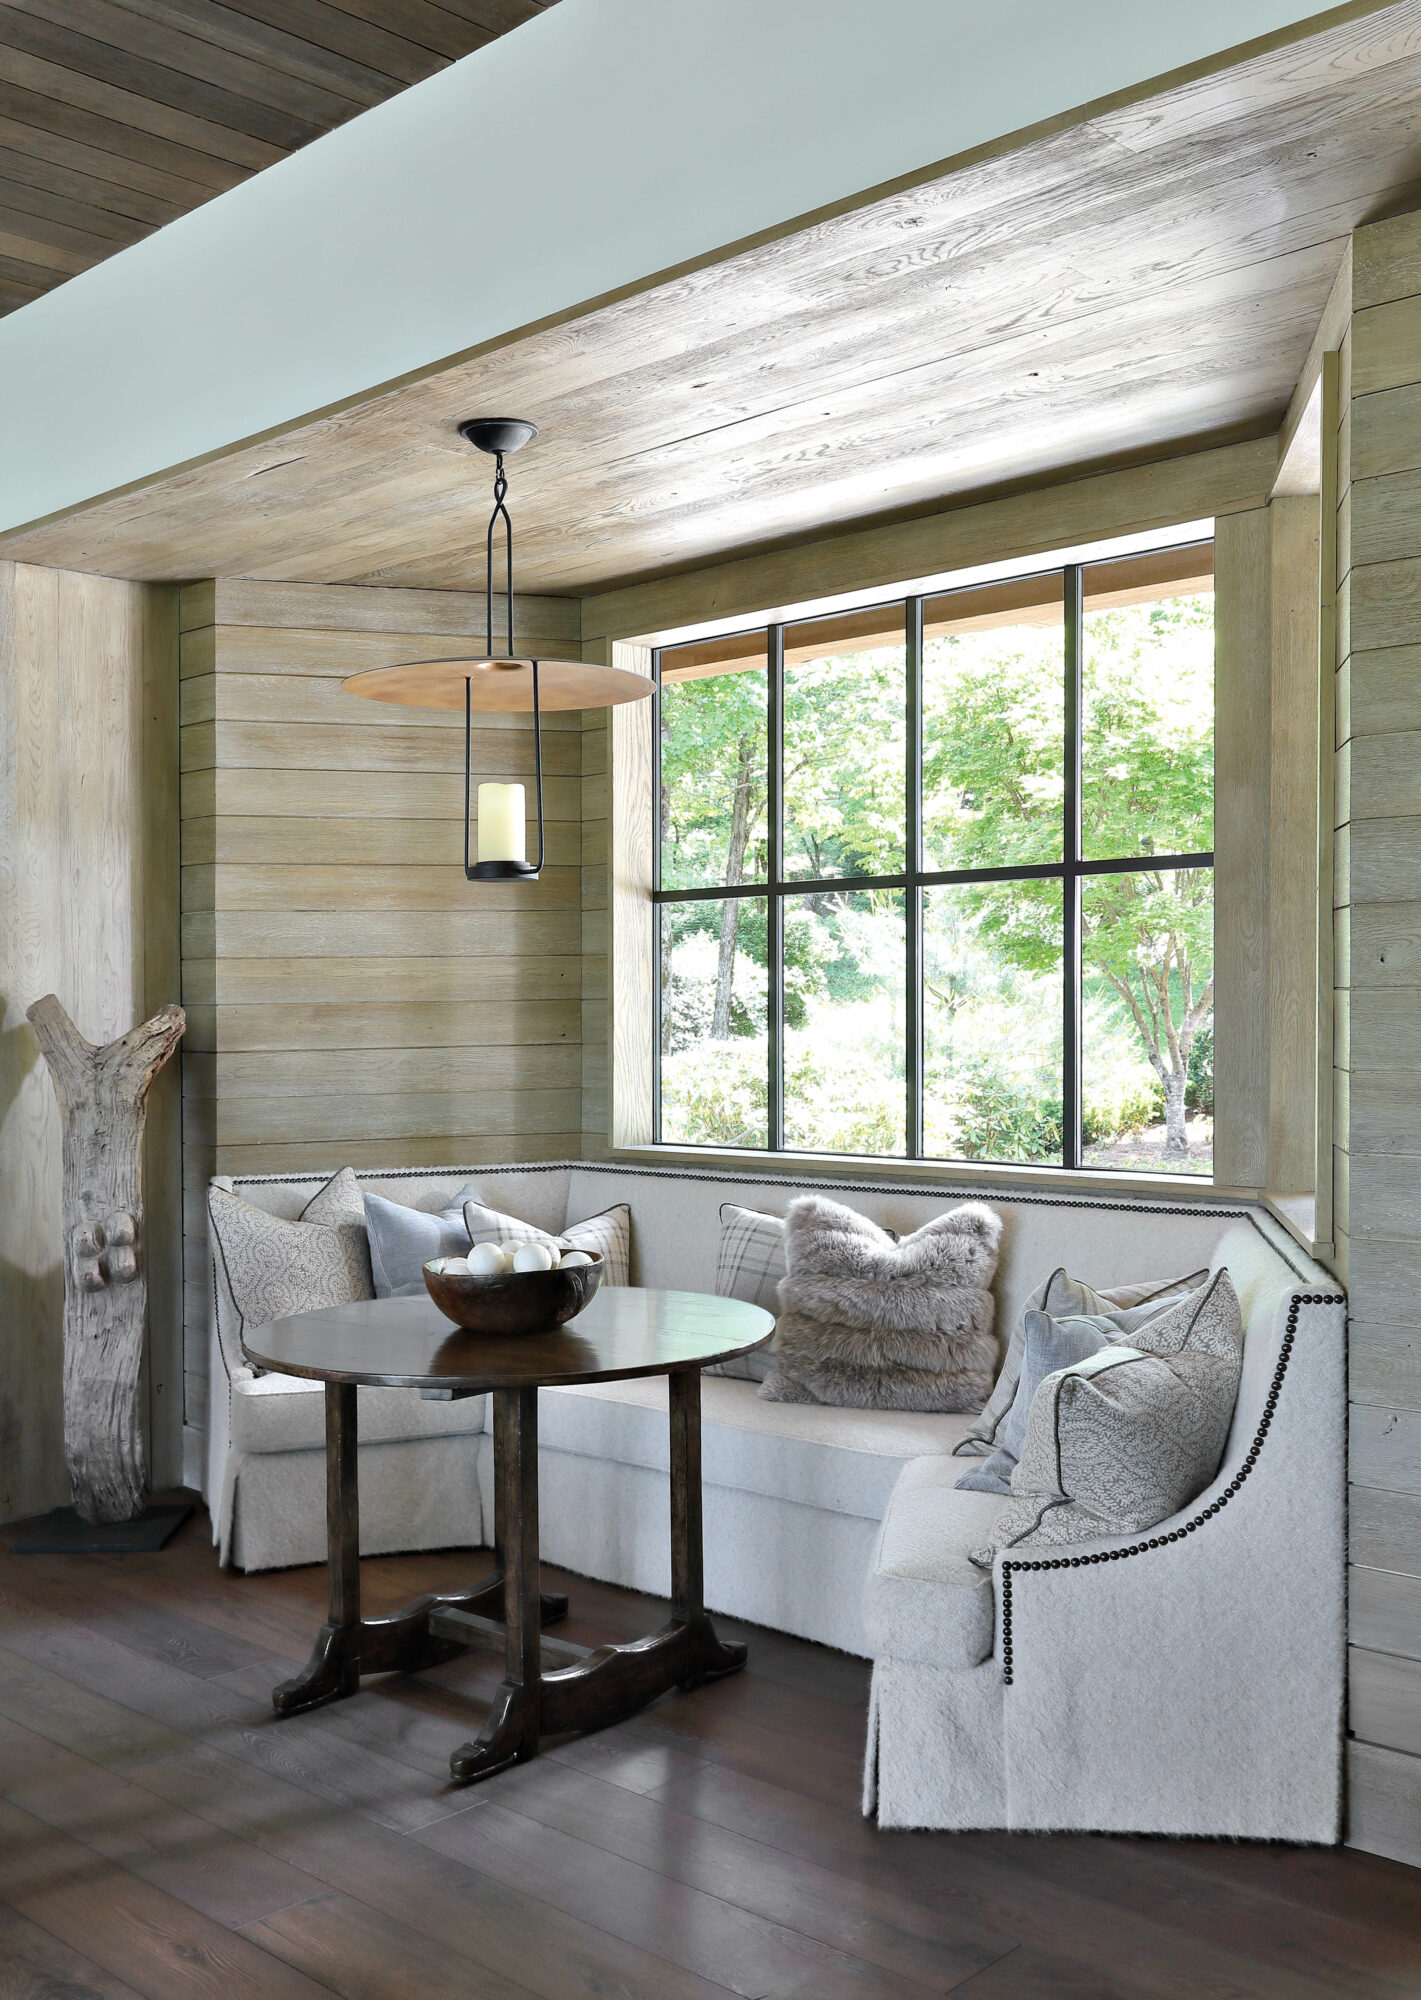 Wood-paneled dining nook with banquette...